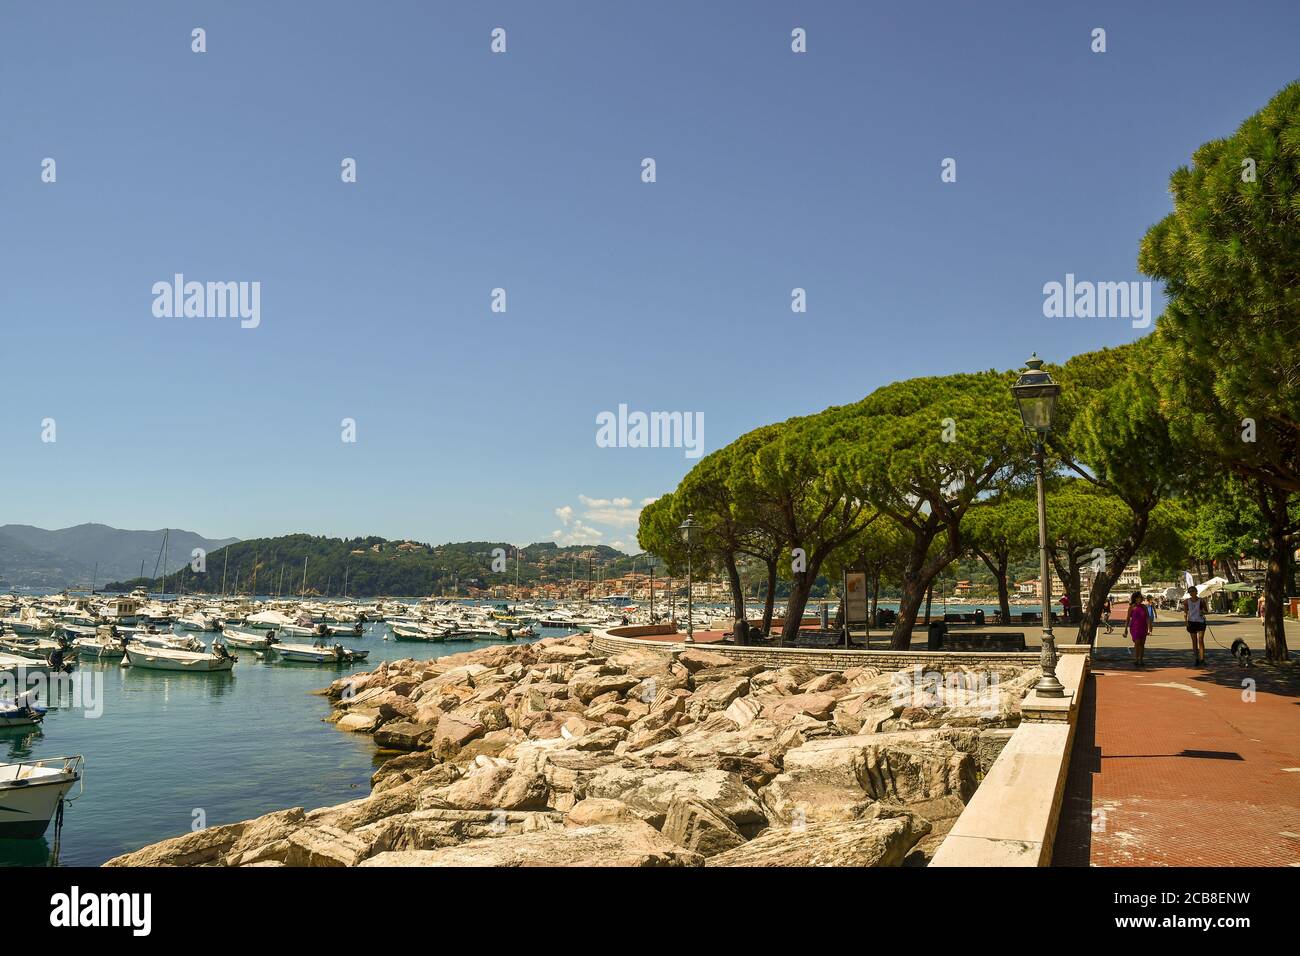 View of the seaside promenade with people walking and the harbor of the sea town on the shore of the Gulf of the Poets, Lerici, La Spezia, Italy Stock Photo